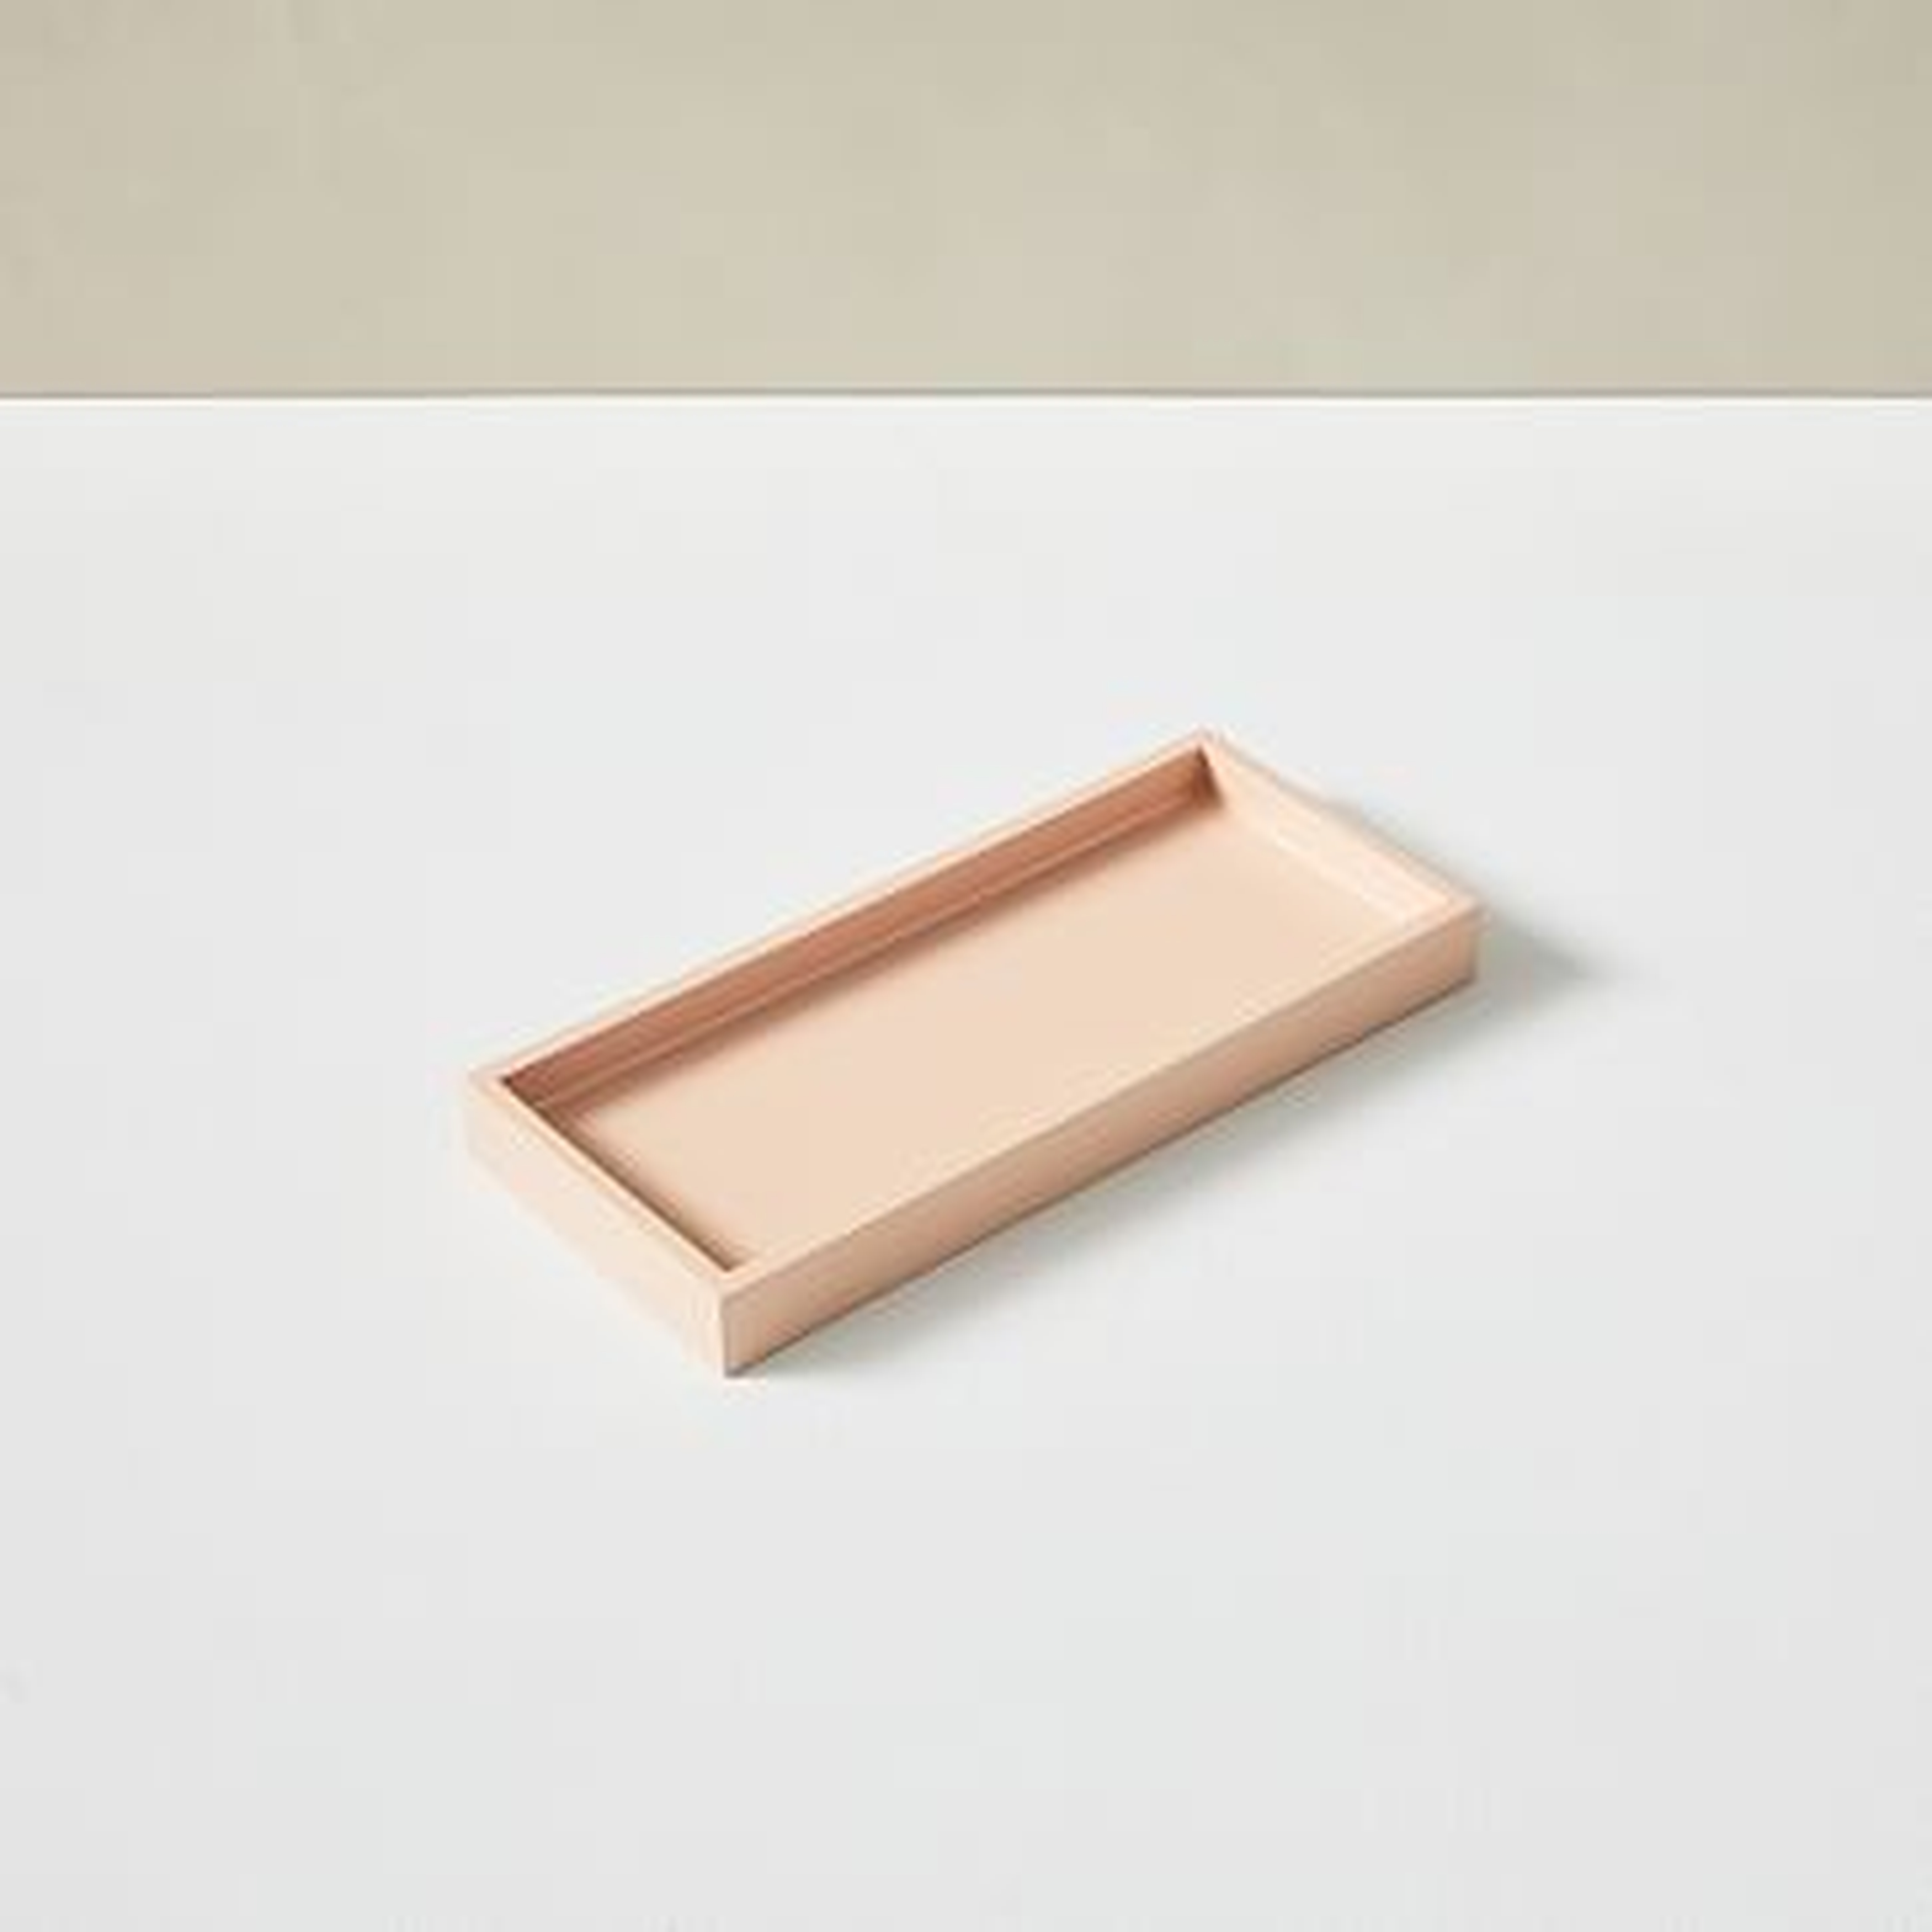 Slim Lacquer Tray, Small, Blush, Wood Composite, Small - West Elm